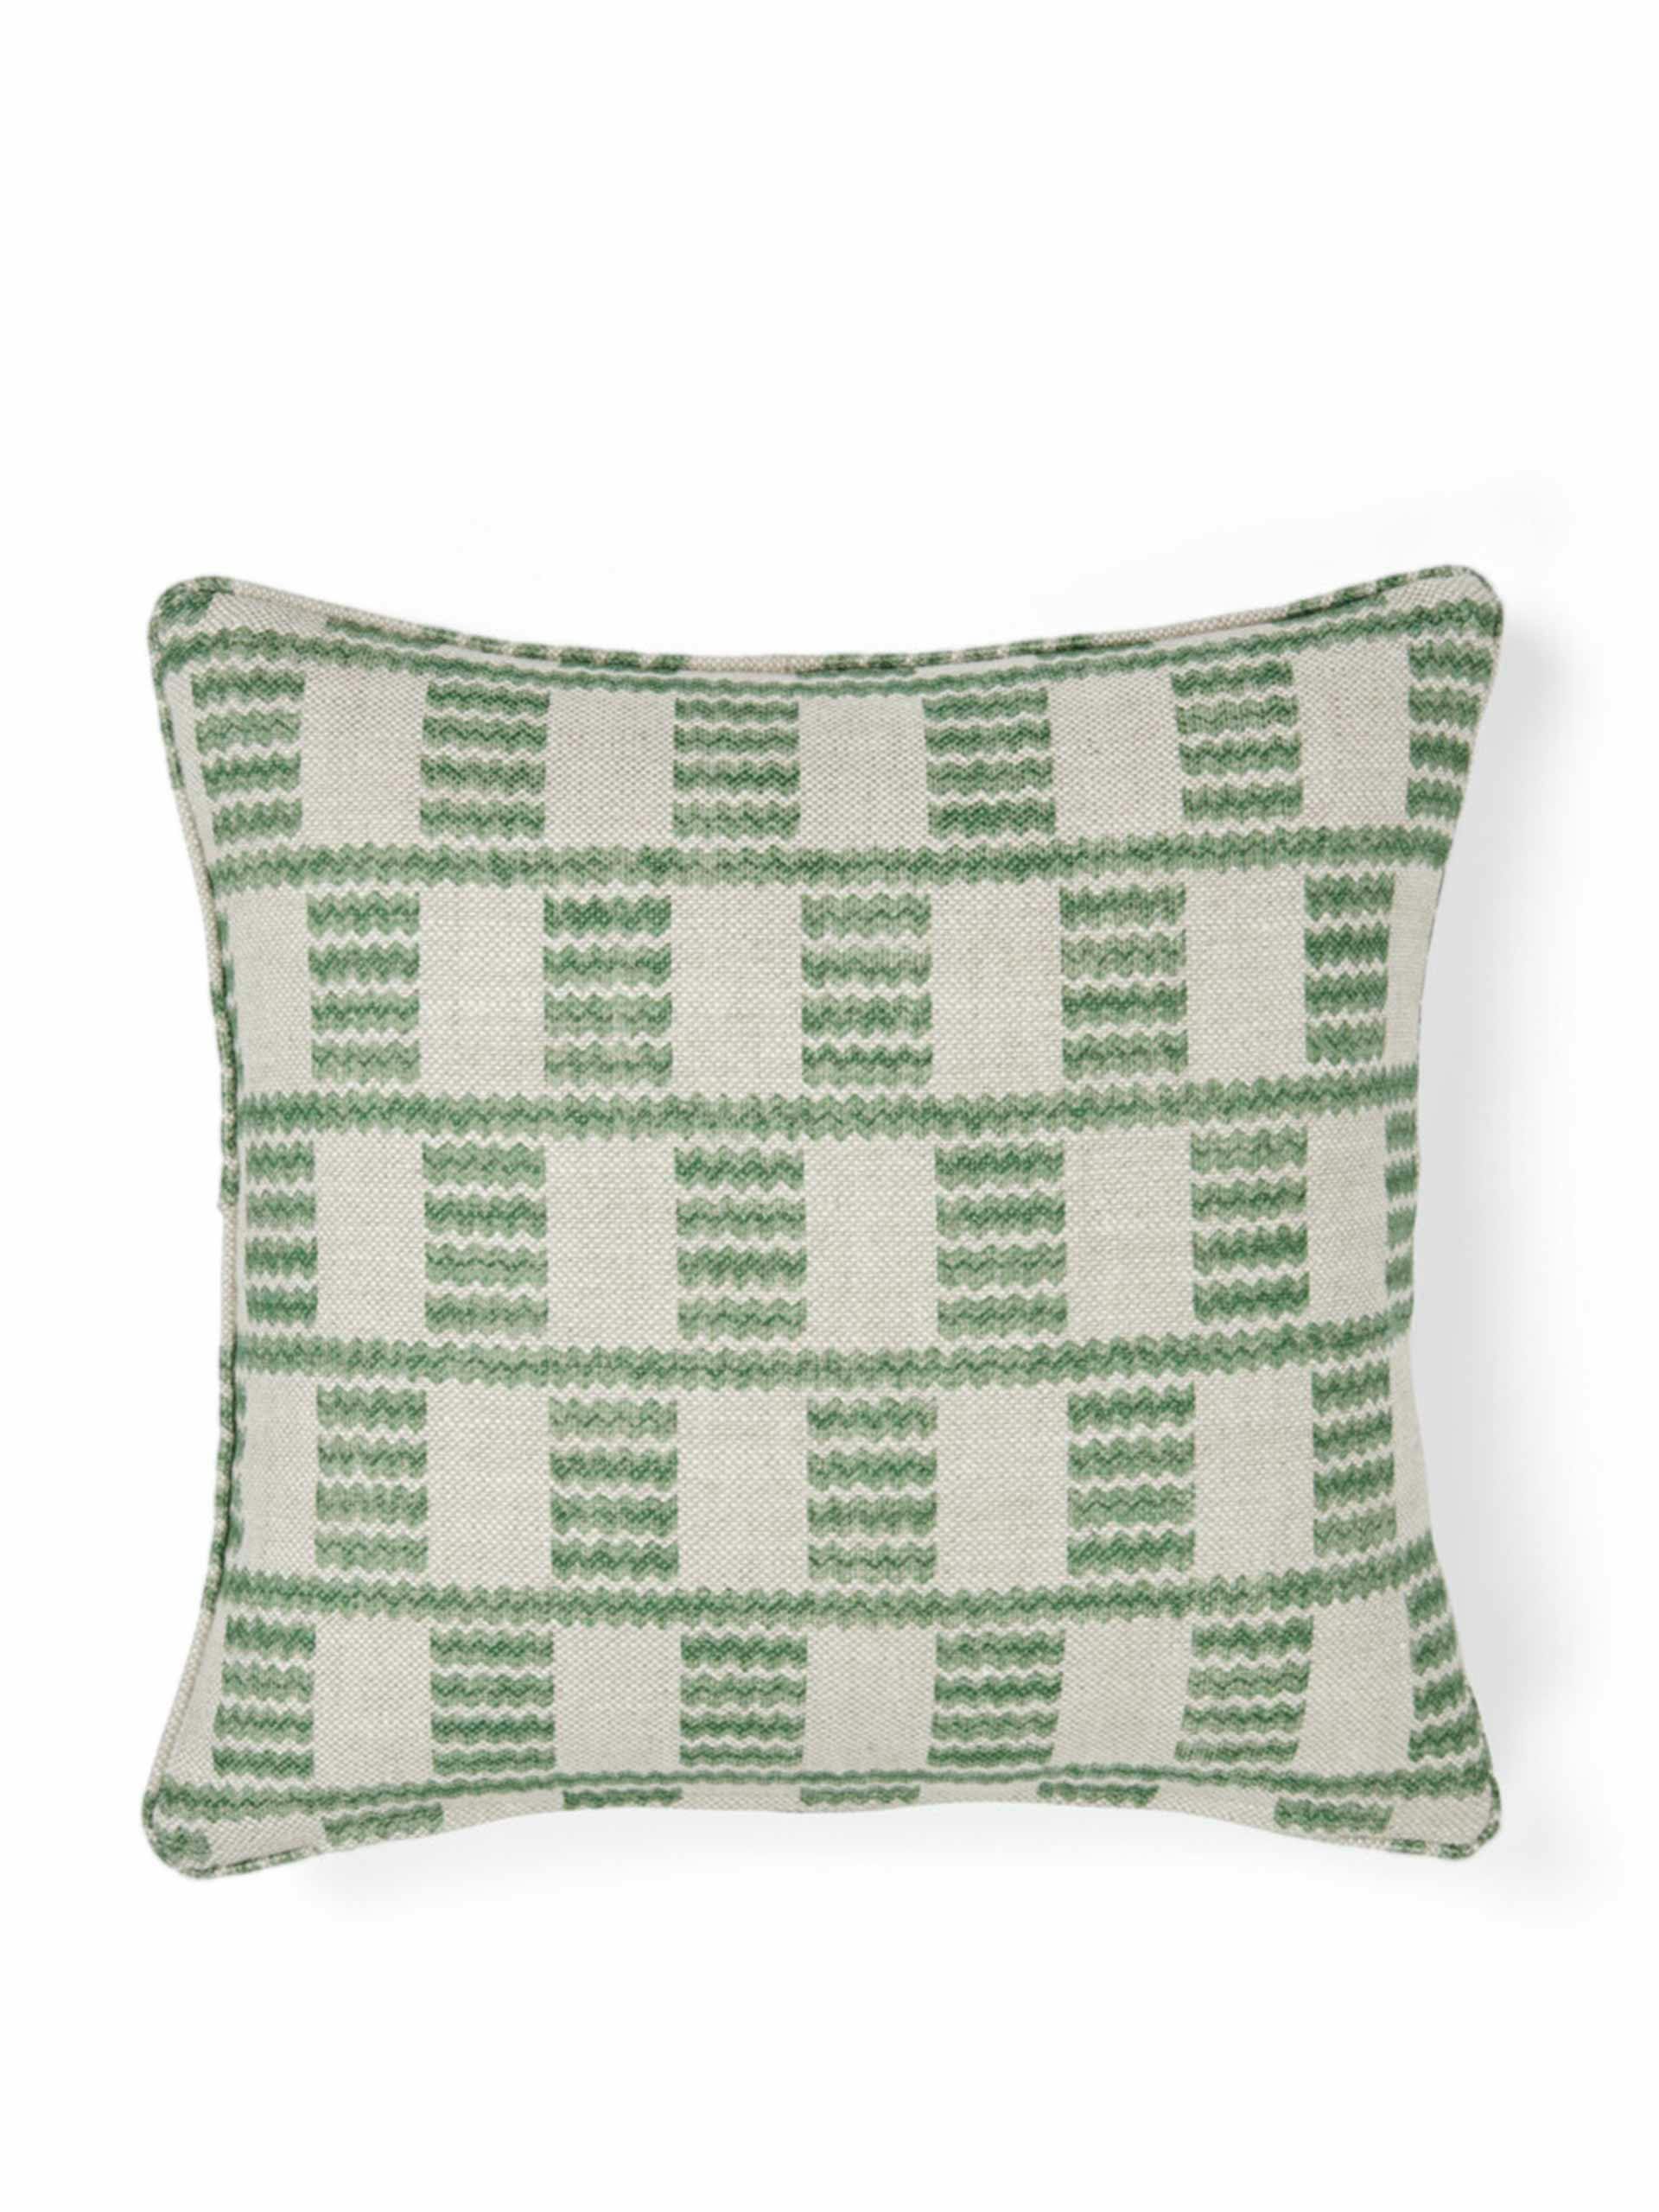 Scatter cushion in Green Cove